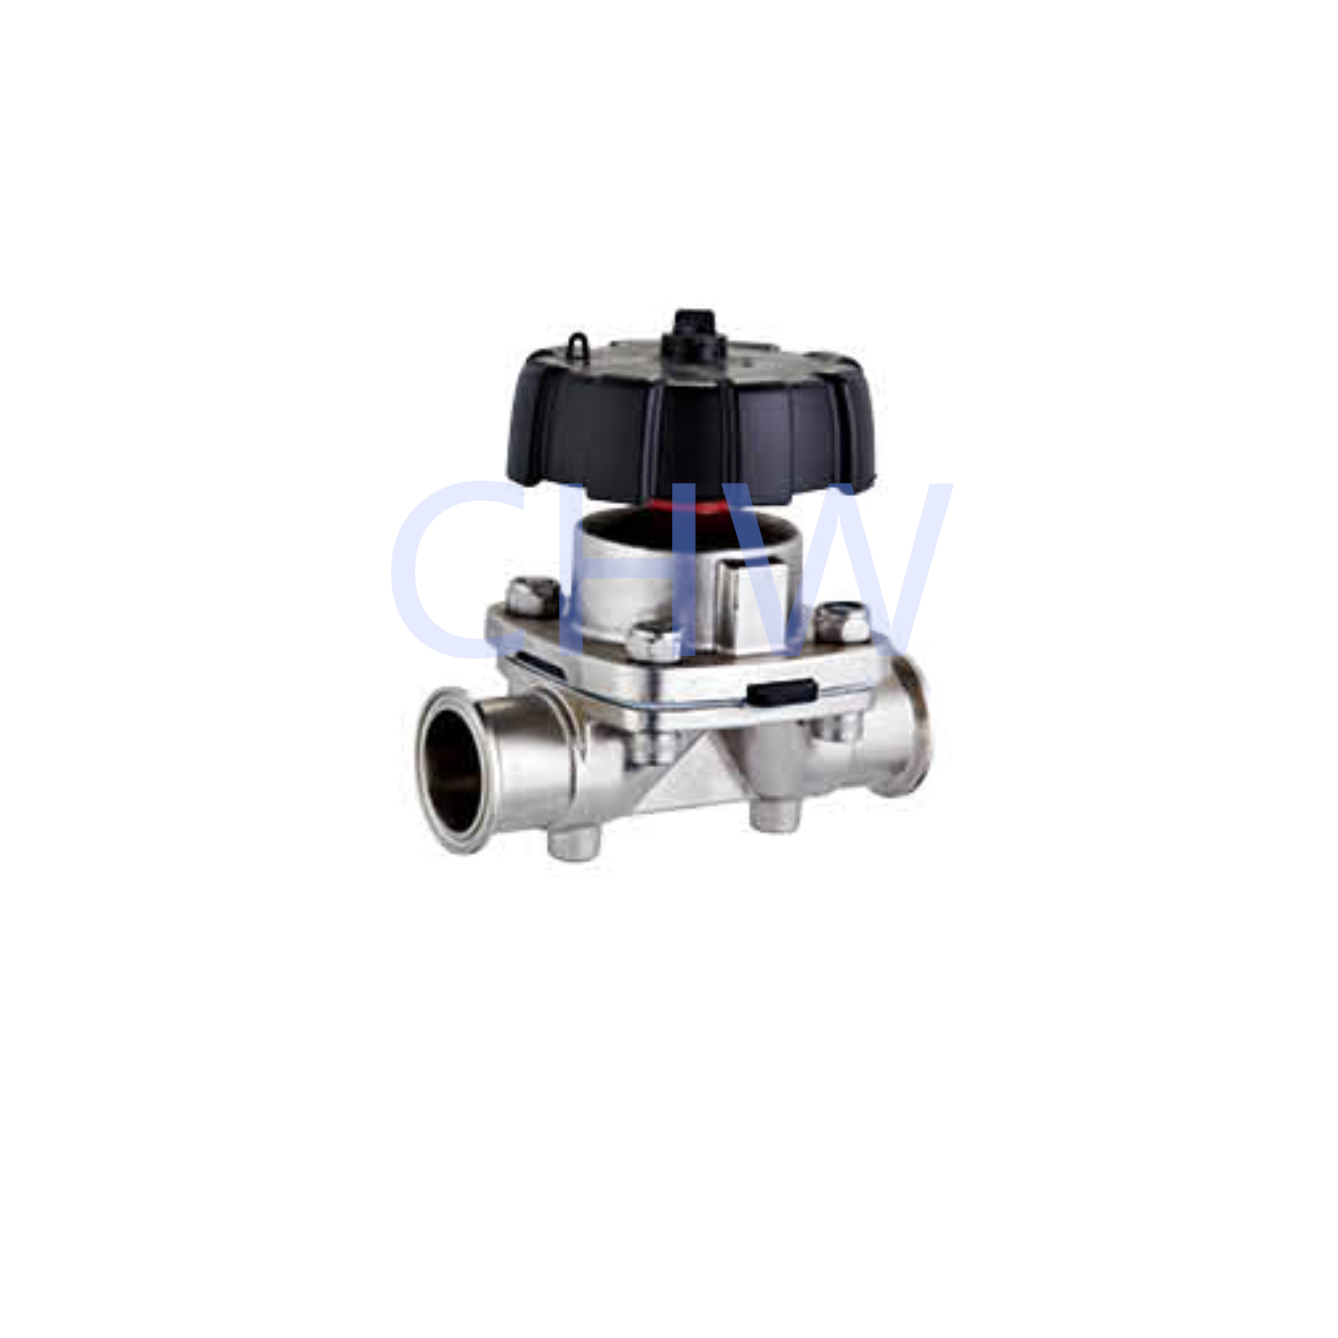 Sanitary stainless steel high quality Aseptic Diaphragm Valve